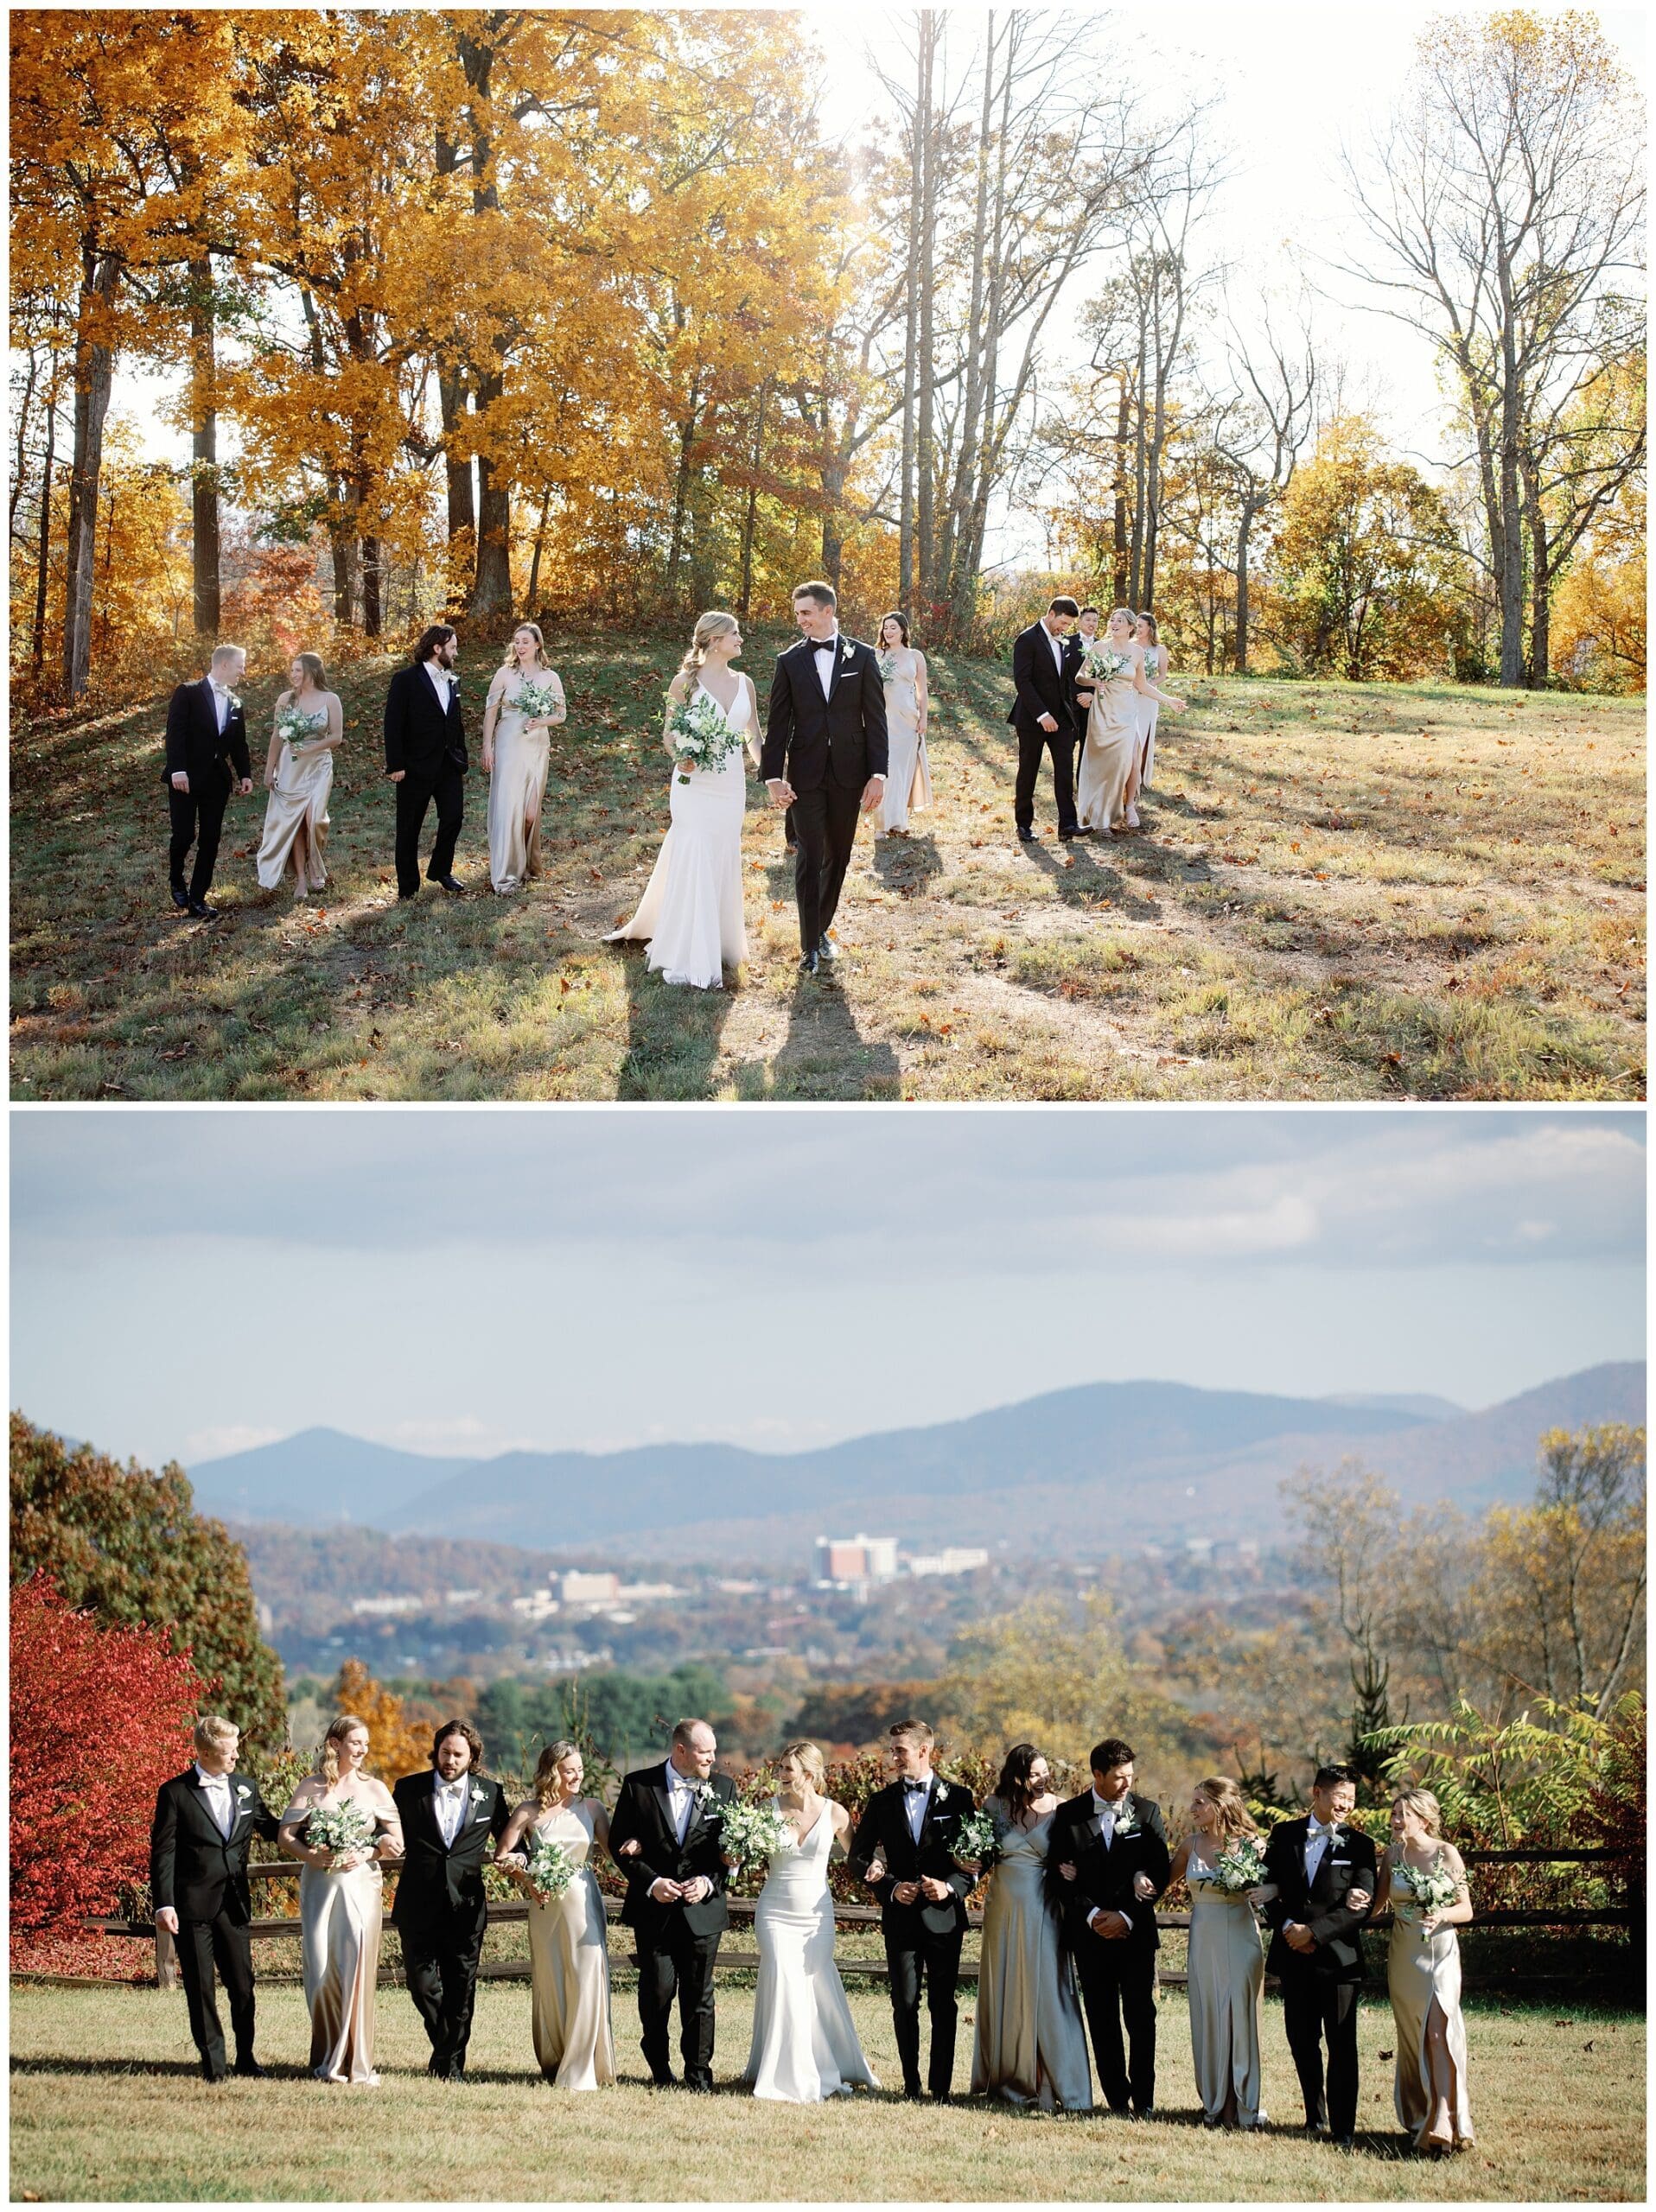 A group of bridesmaids and groomsmen standing in a field during a fall wedding at crest center.